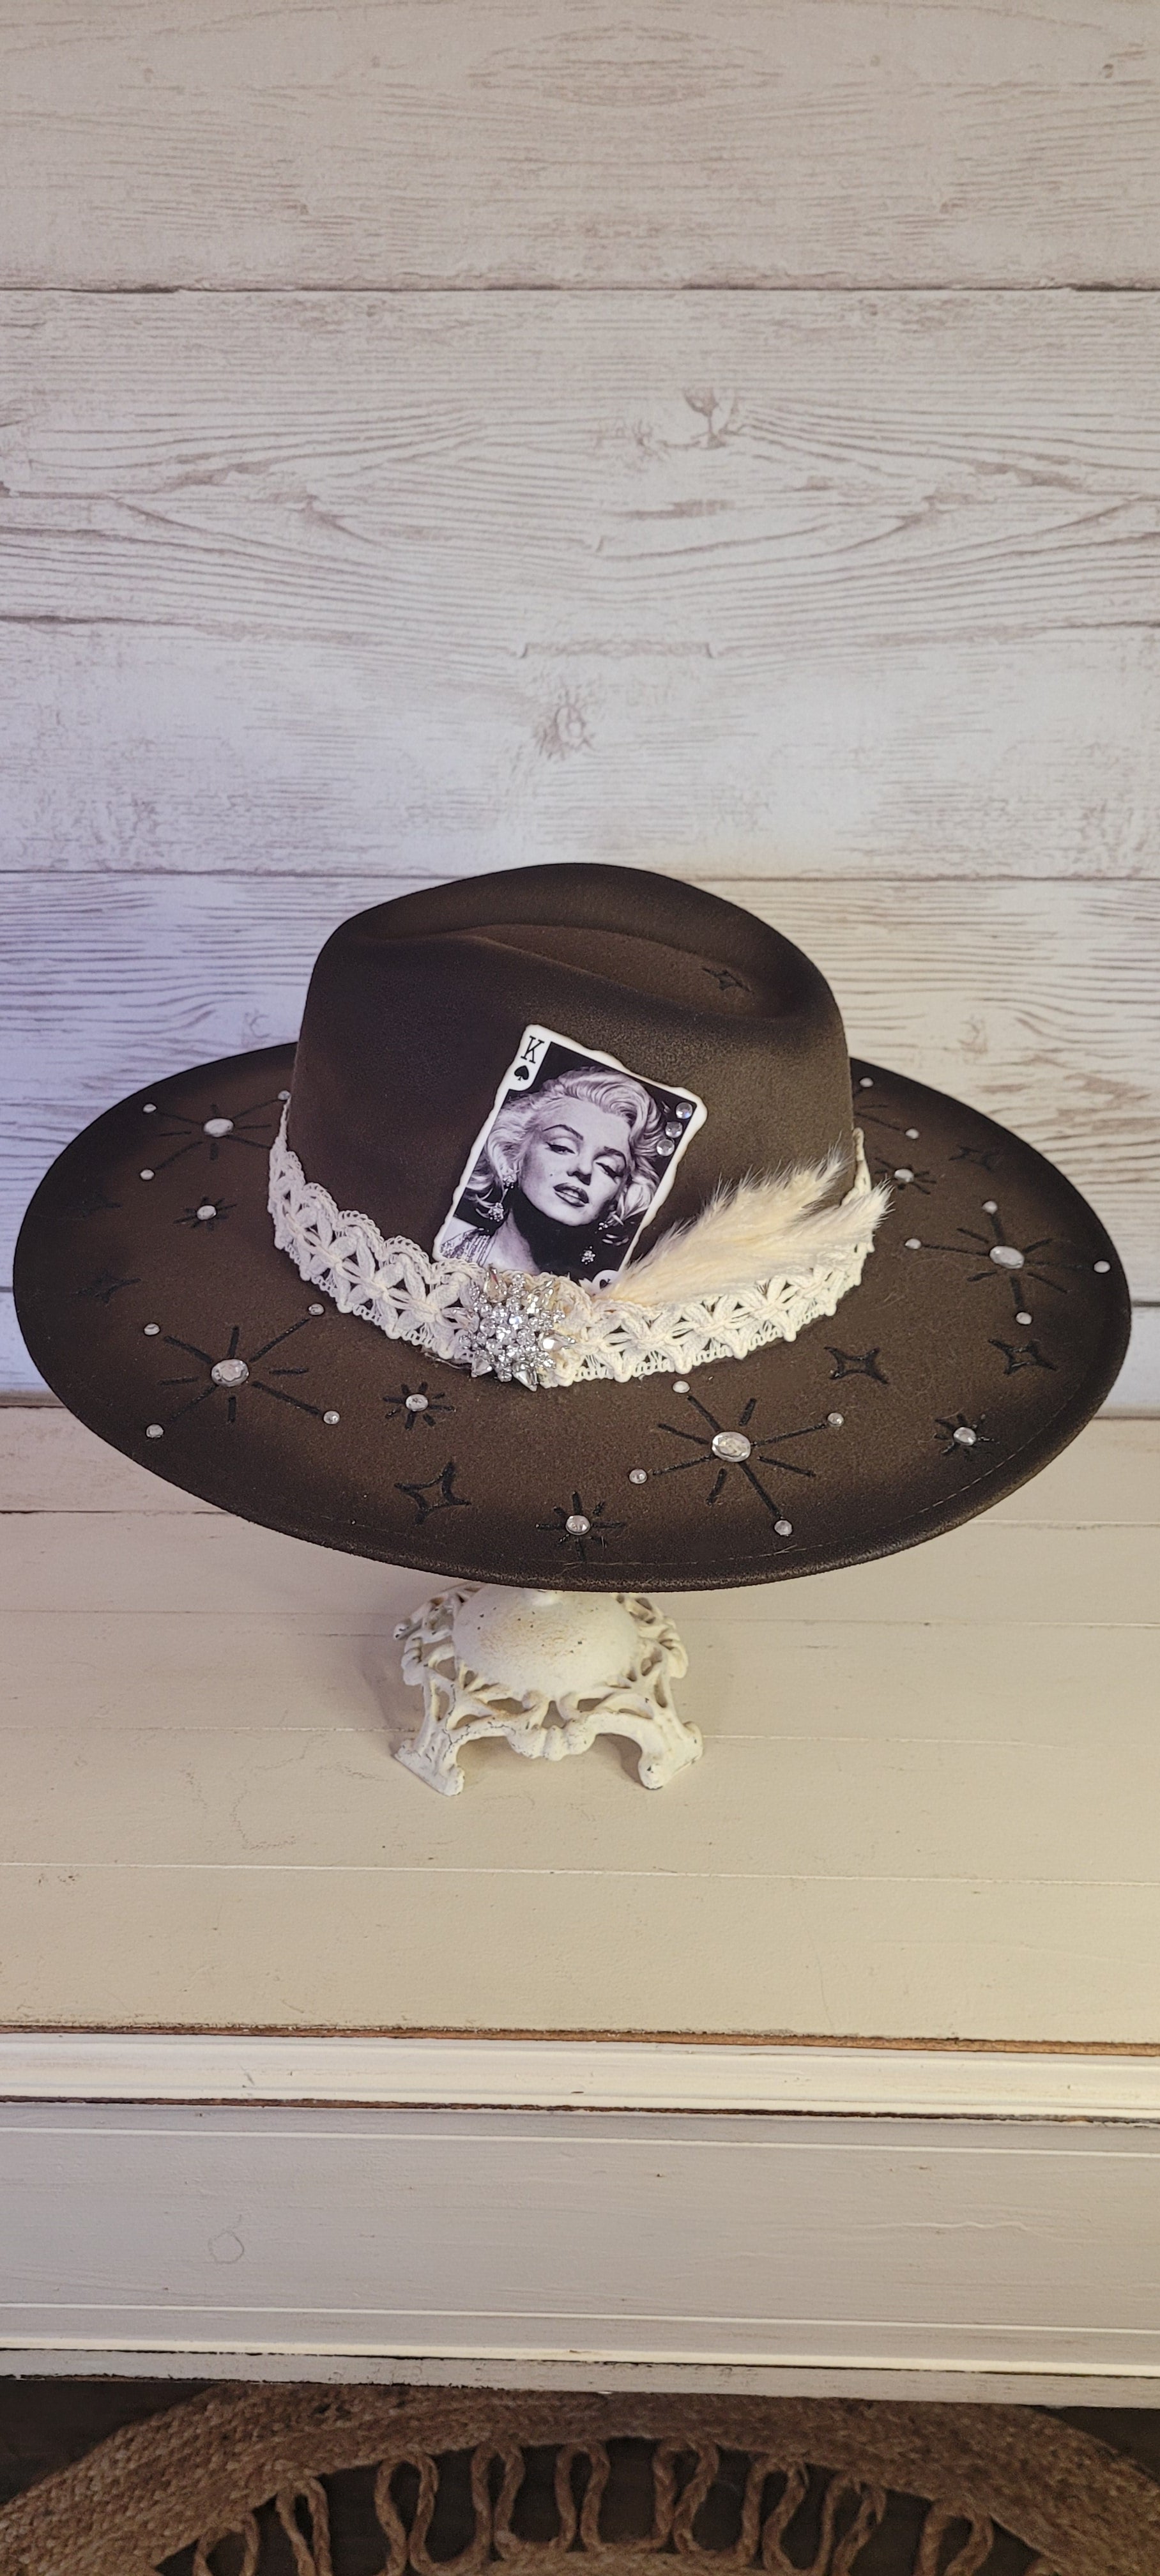 Features engraved stars & diamonds Rhinestone details throughout, pampas, crystal brooch, & playing card Felt hat Flat brim 65% polyester and 35% cotton Ribbon drawstring for hat size adjustment Head Circumference: 24" Crown Height: 5" Brim Length: 15.75" Brim Width: 14.5" Branded & numbered inside crown Custom designed by Kayla